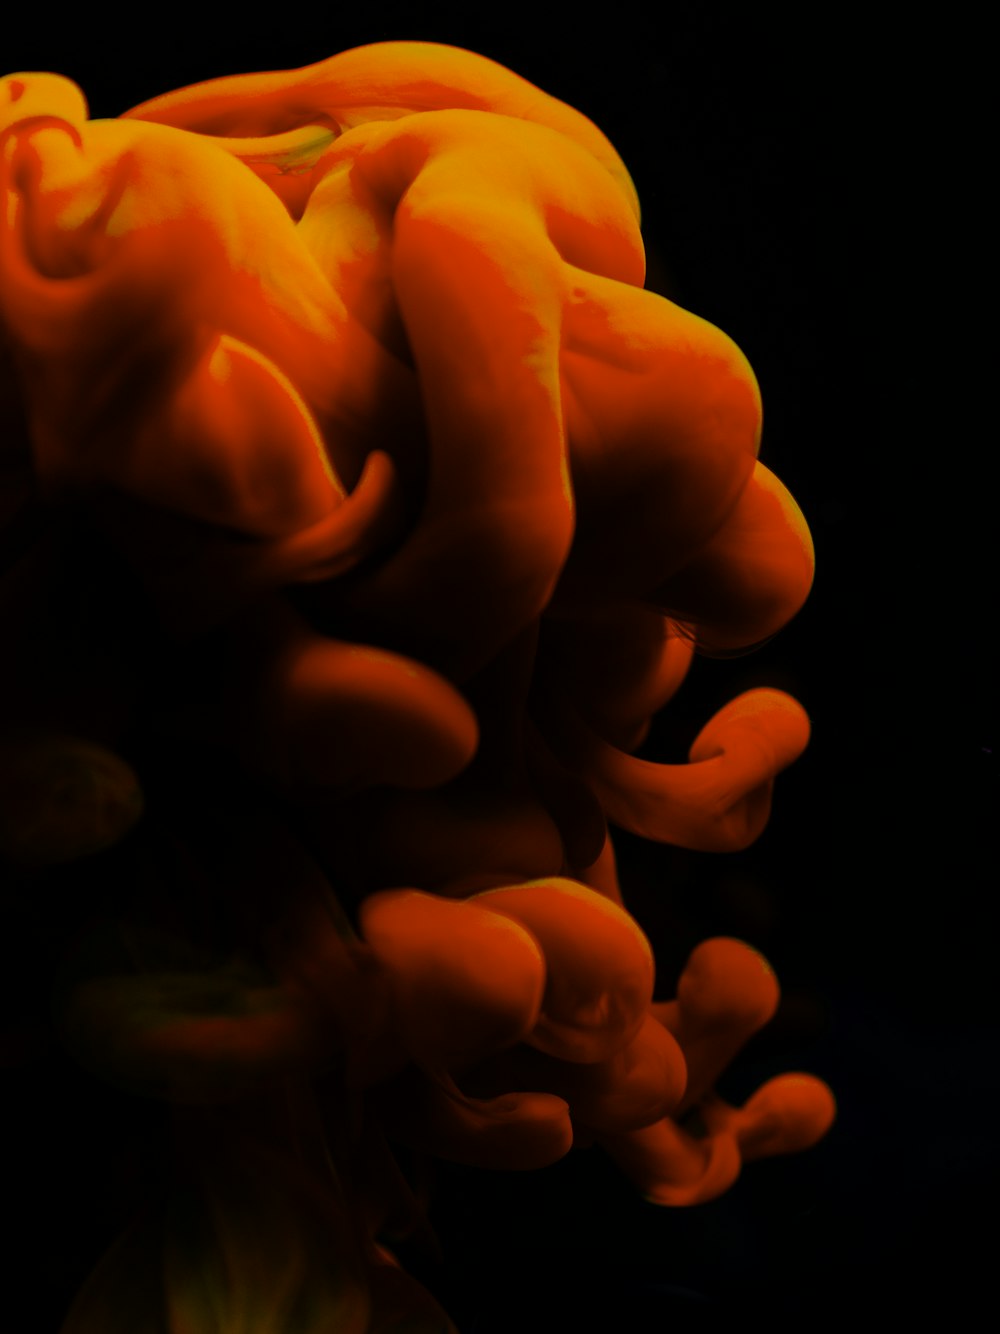 a close up of an orange substance on a black background